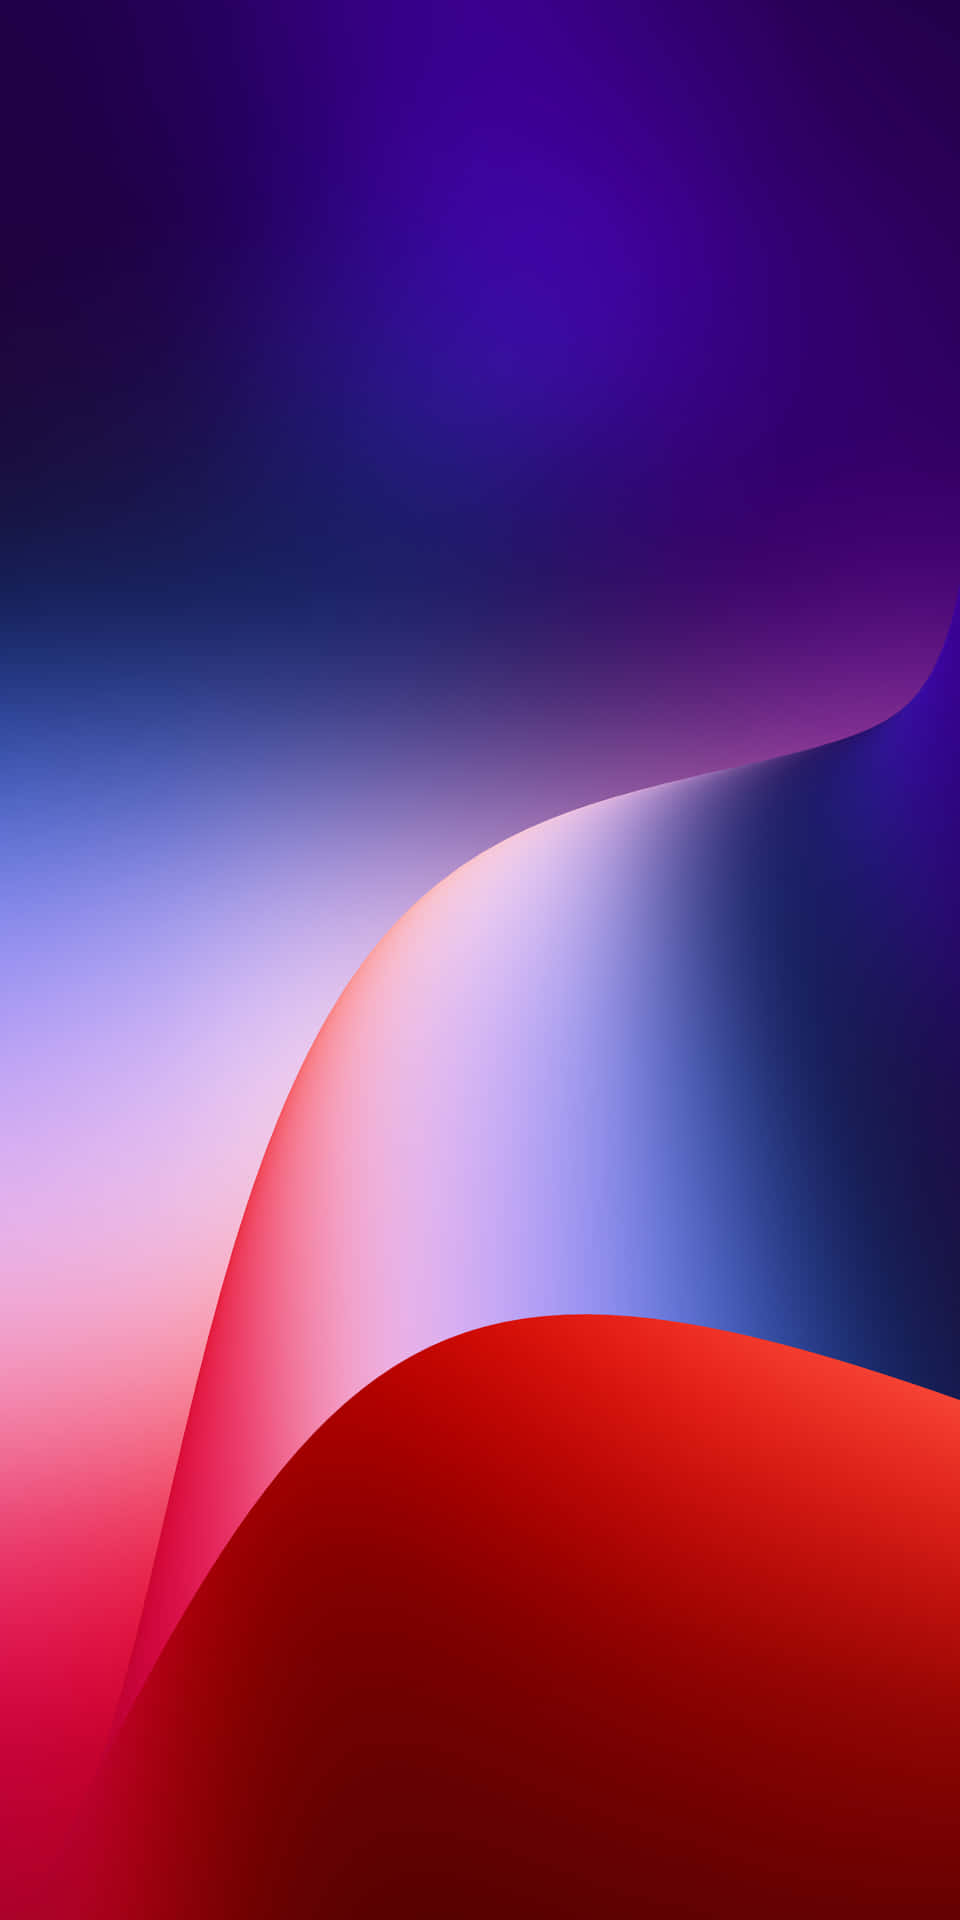 Download Get Ready for a New Level of Power with iPhone 11 | Wallpapers.com